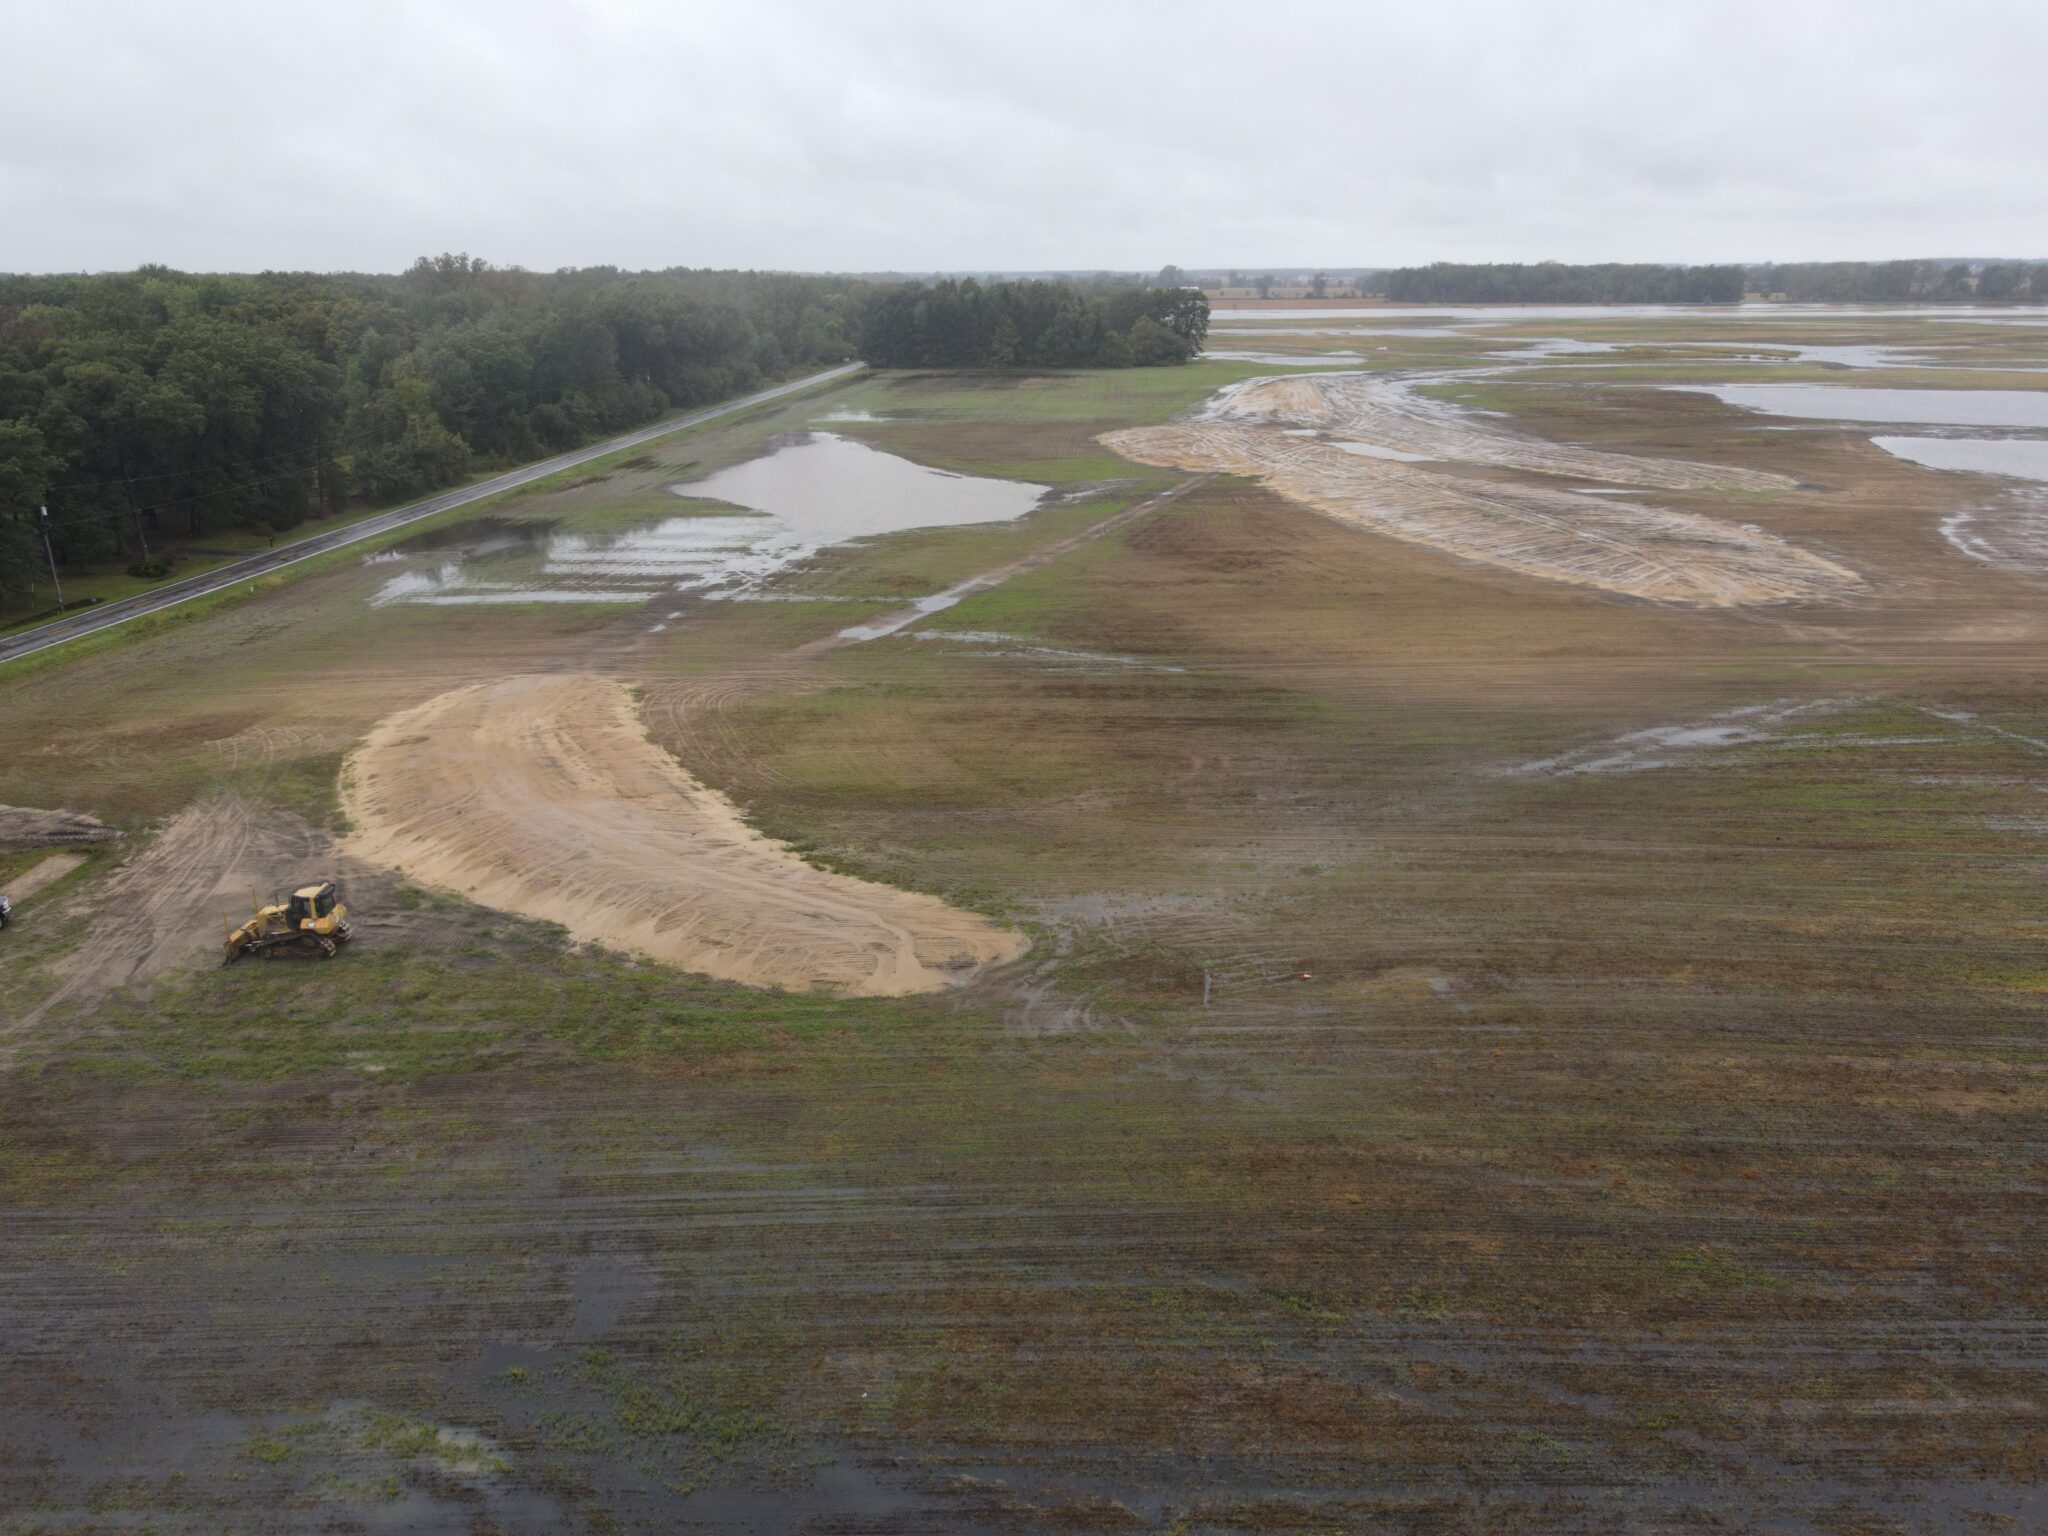 Sandhill Crane Wetlands Project- Our Largest Construction Project to Date